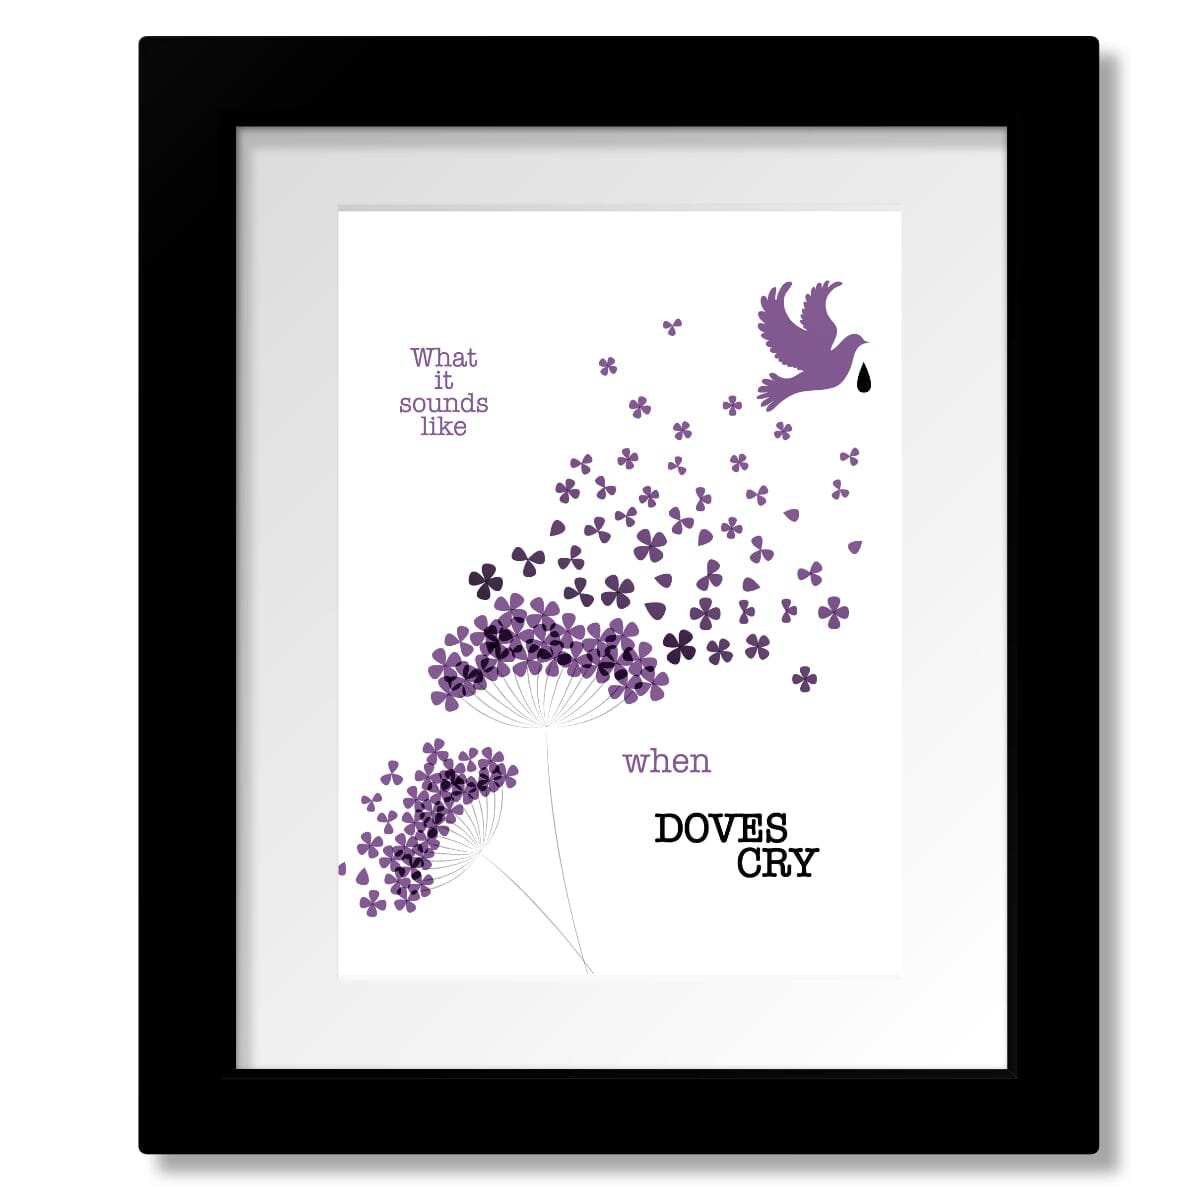 When Doves Cry by Prince - Song Lyrics Wall Art Print Poster Song Lyrics Art Song Lyrics Art 8x10 Matted and Framed Print 